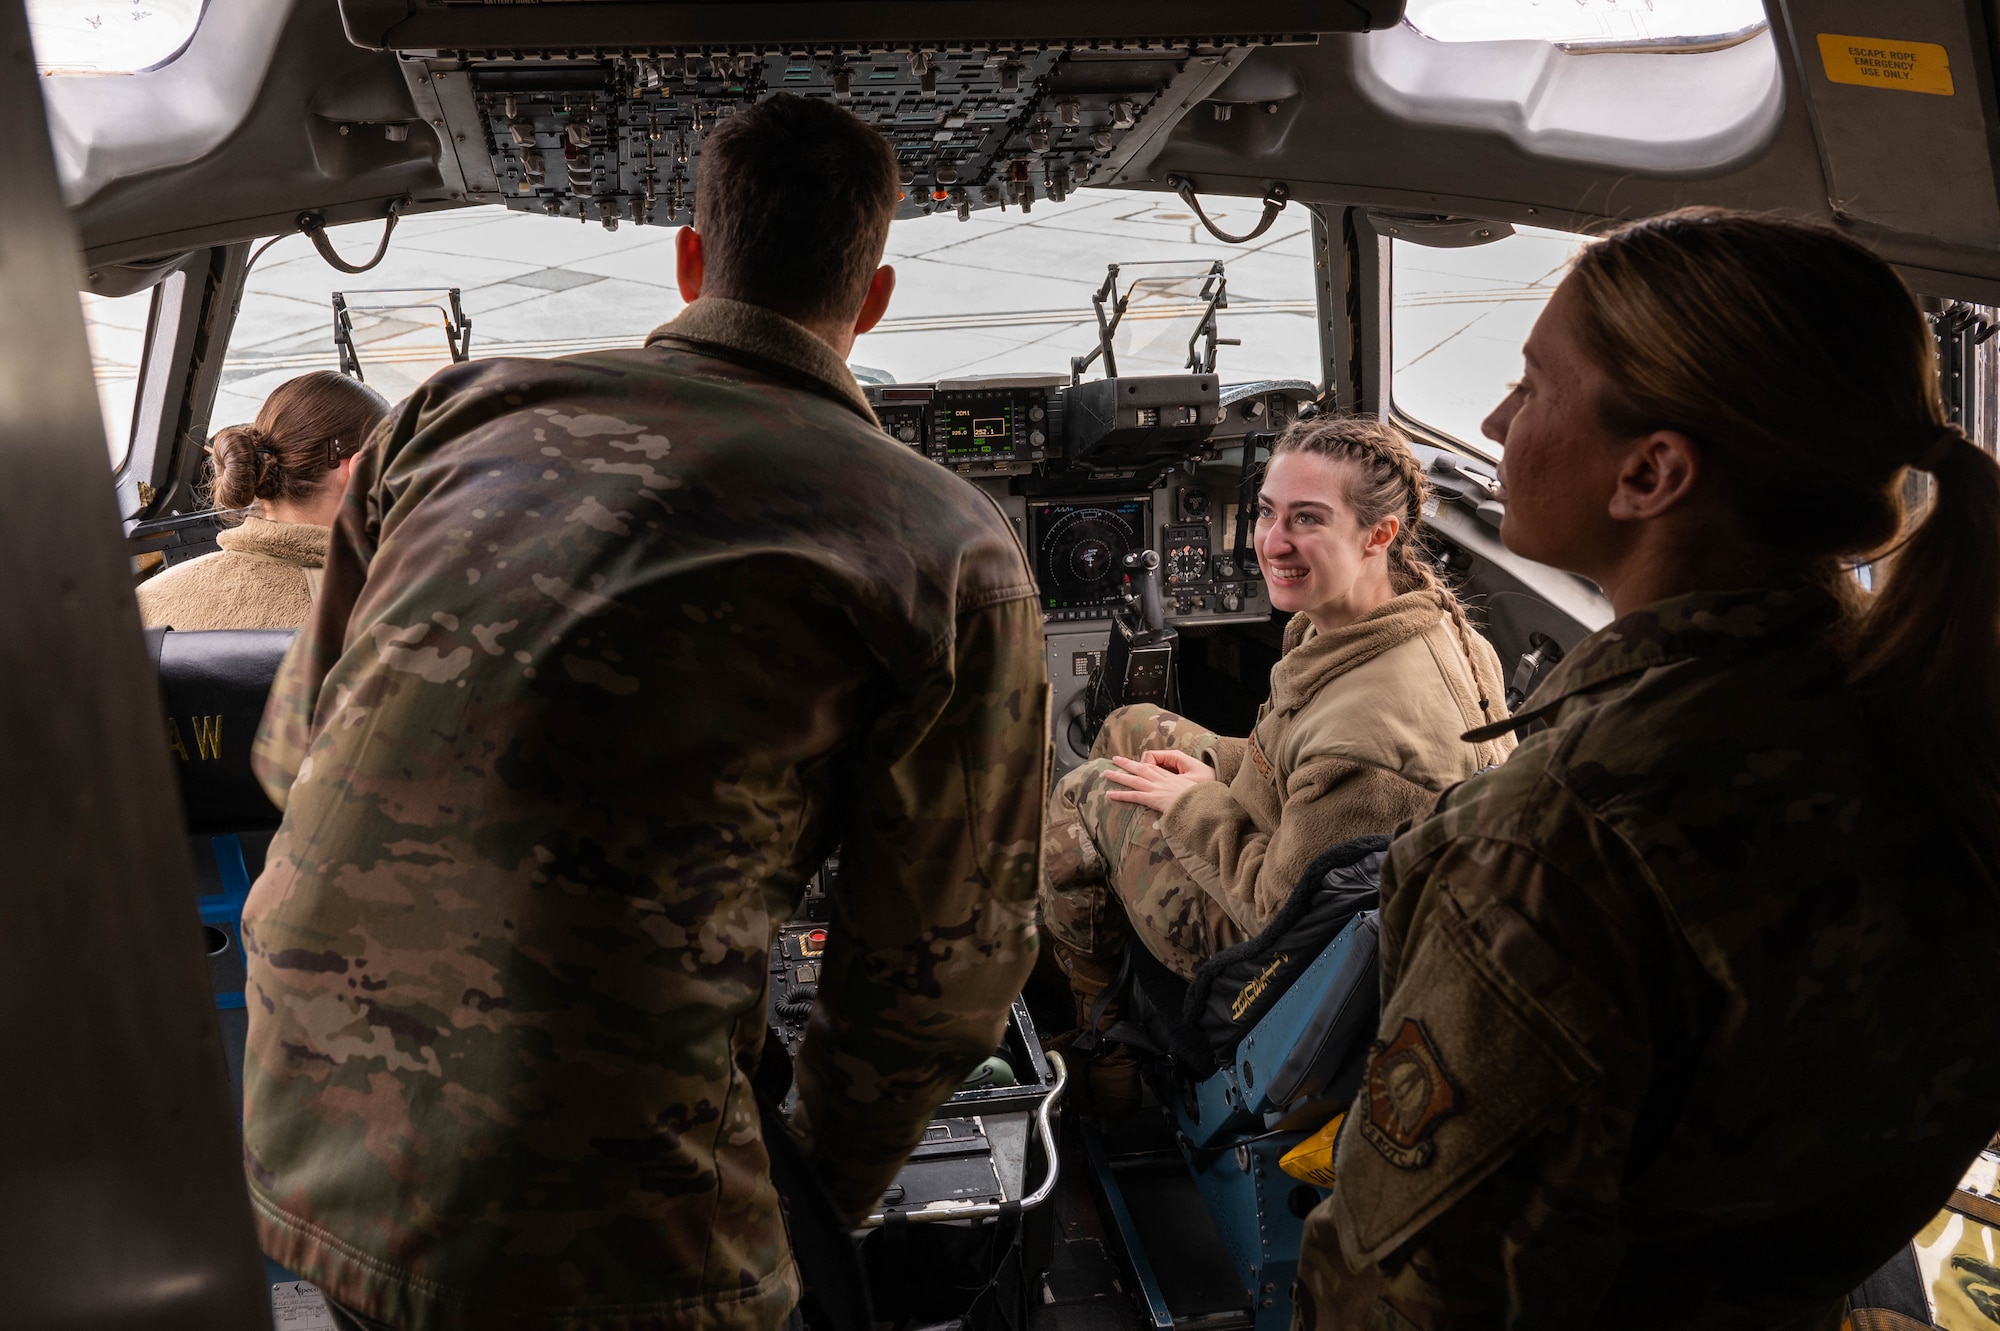 A group of people in uniform sit in a C-17 Globemaster III cockpit